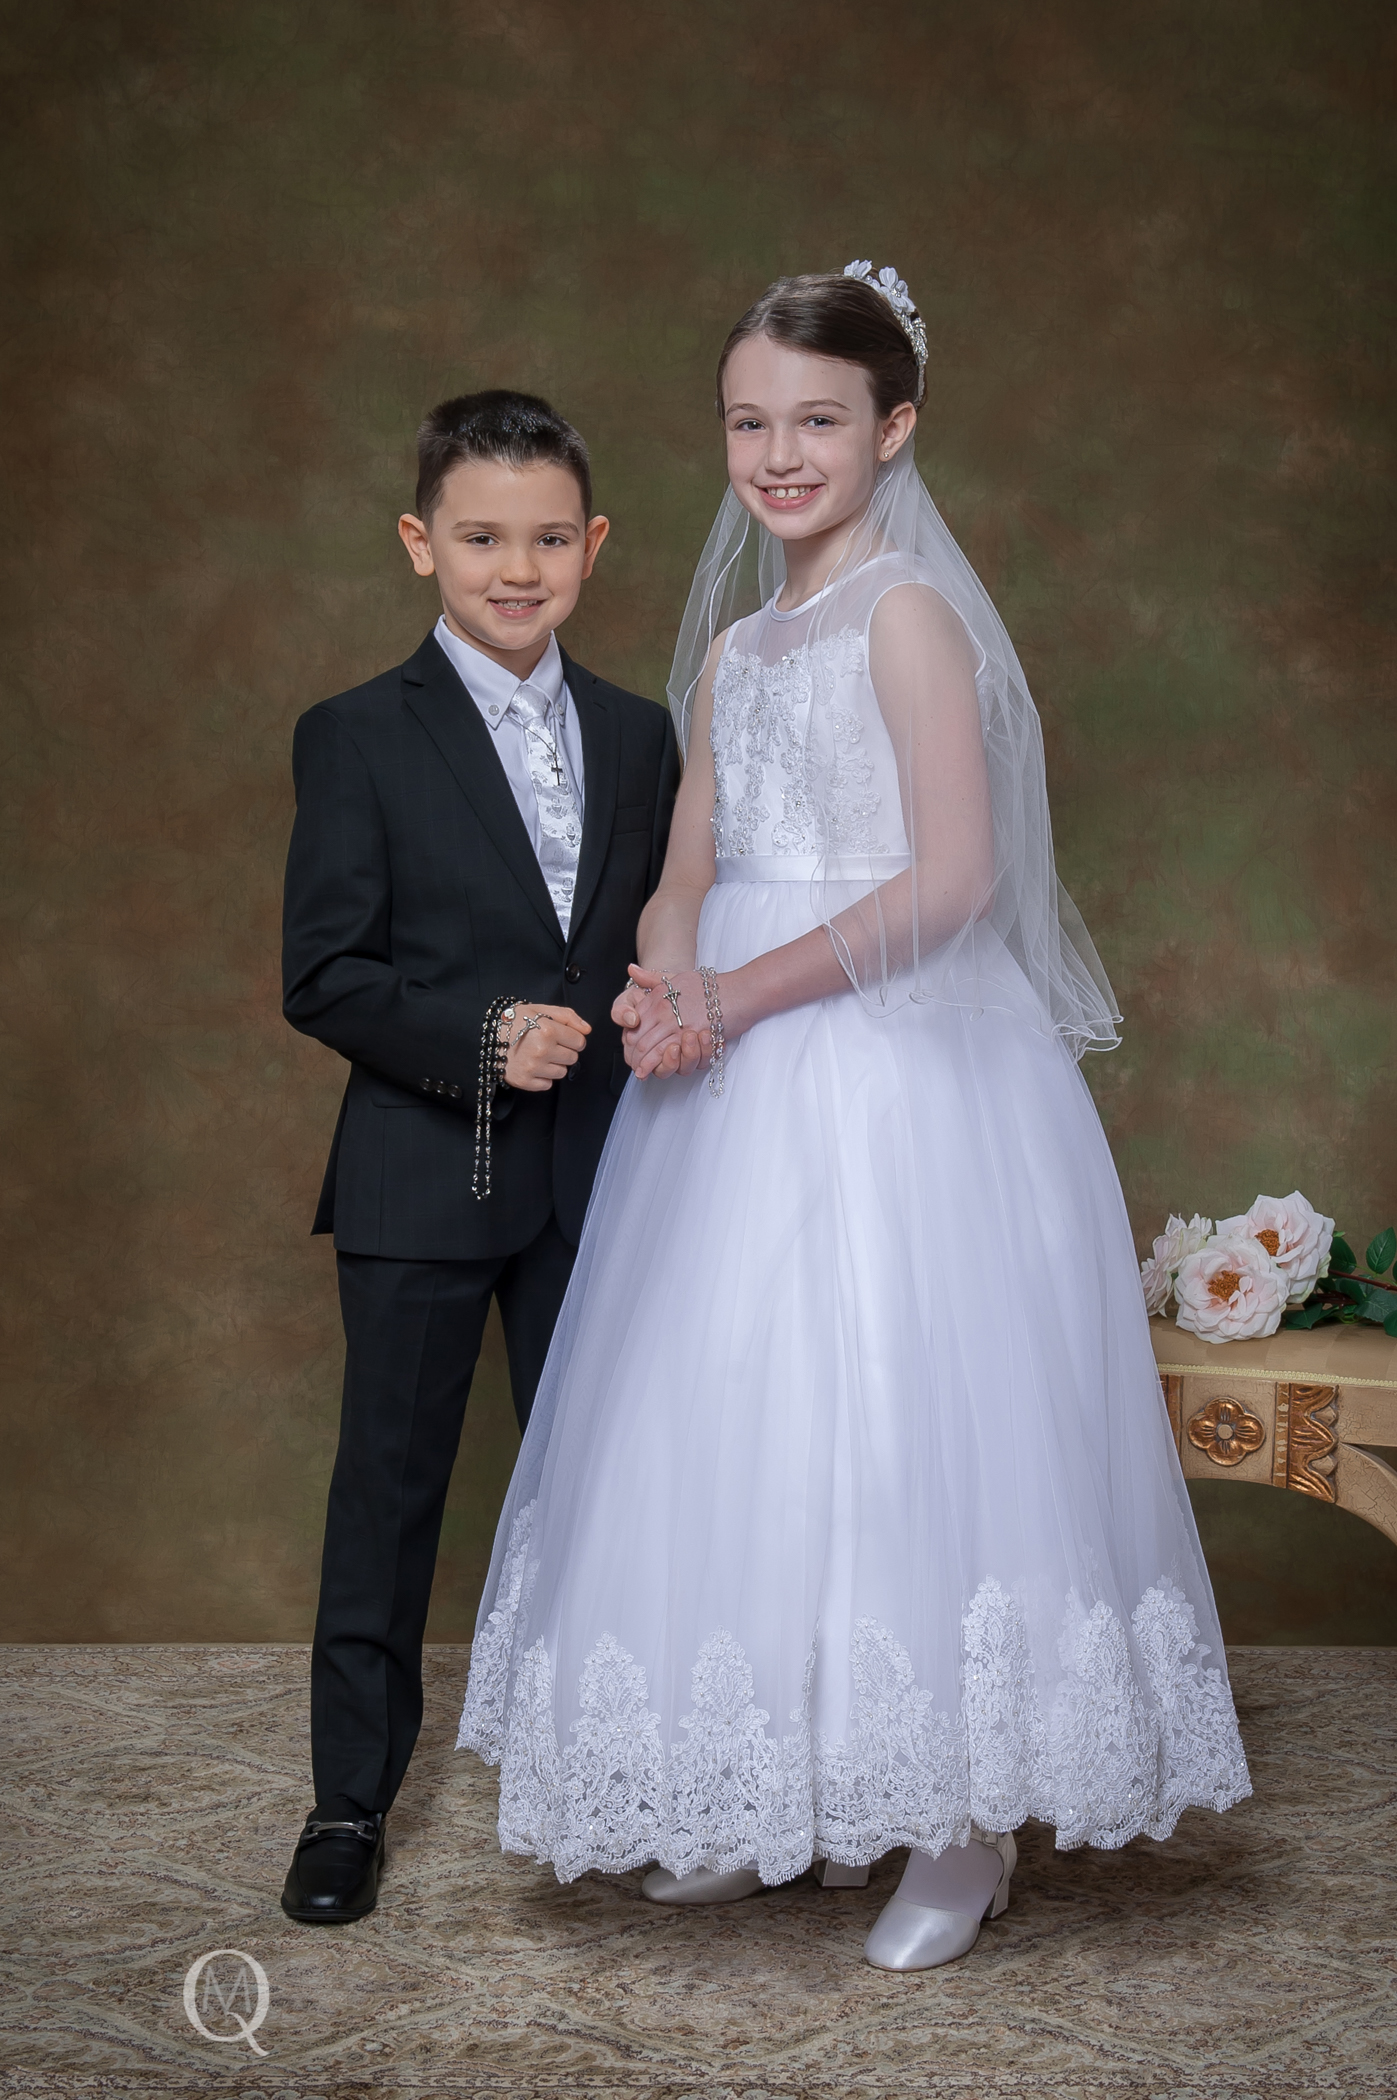 First Communion Portraits | Long Island Children's Photography — Family and  Newborn Photography Long Beach, NY |Teresa Geraghty Photography